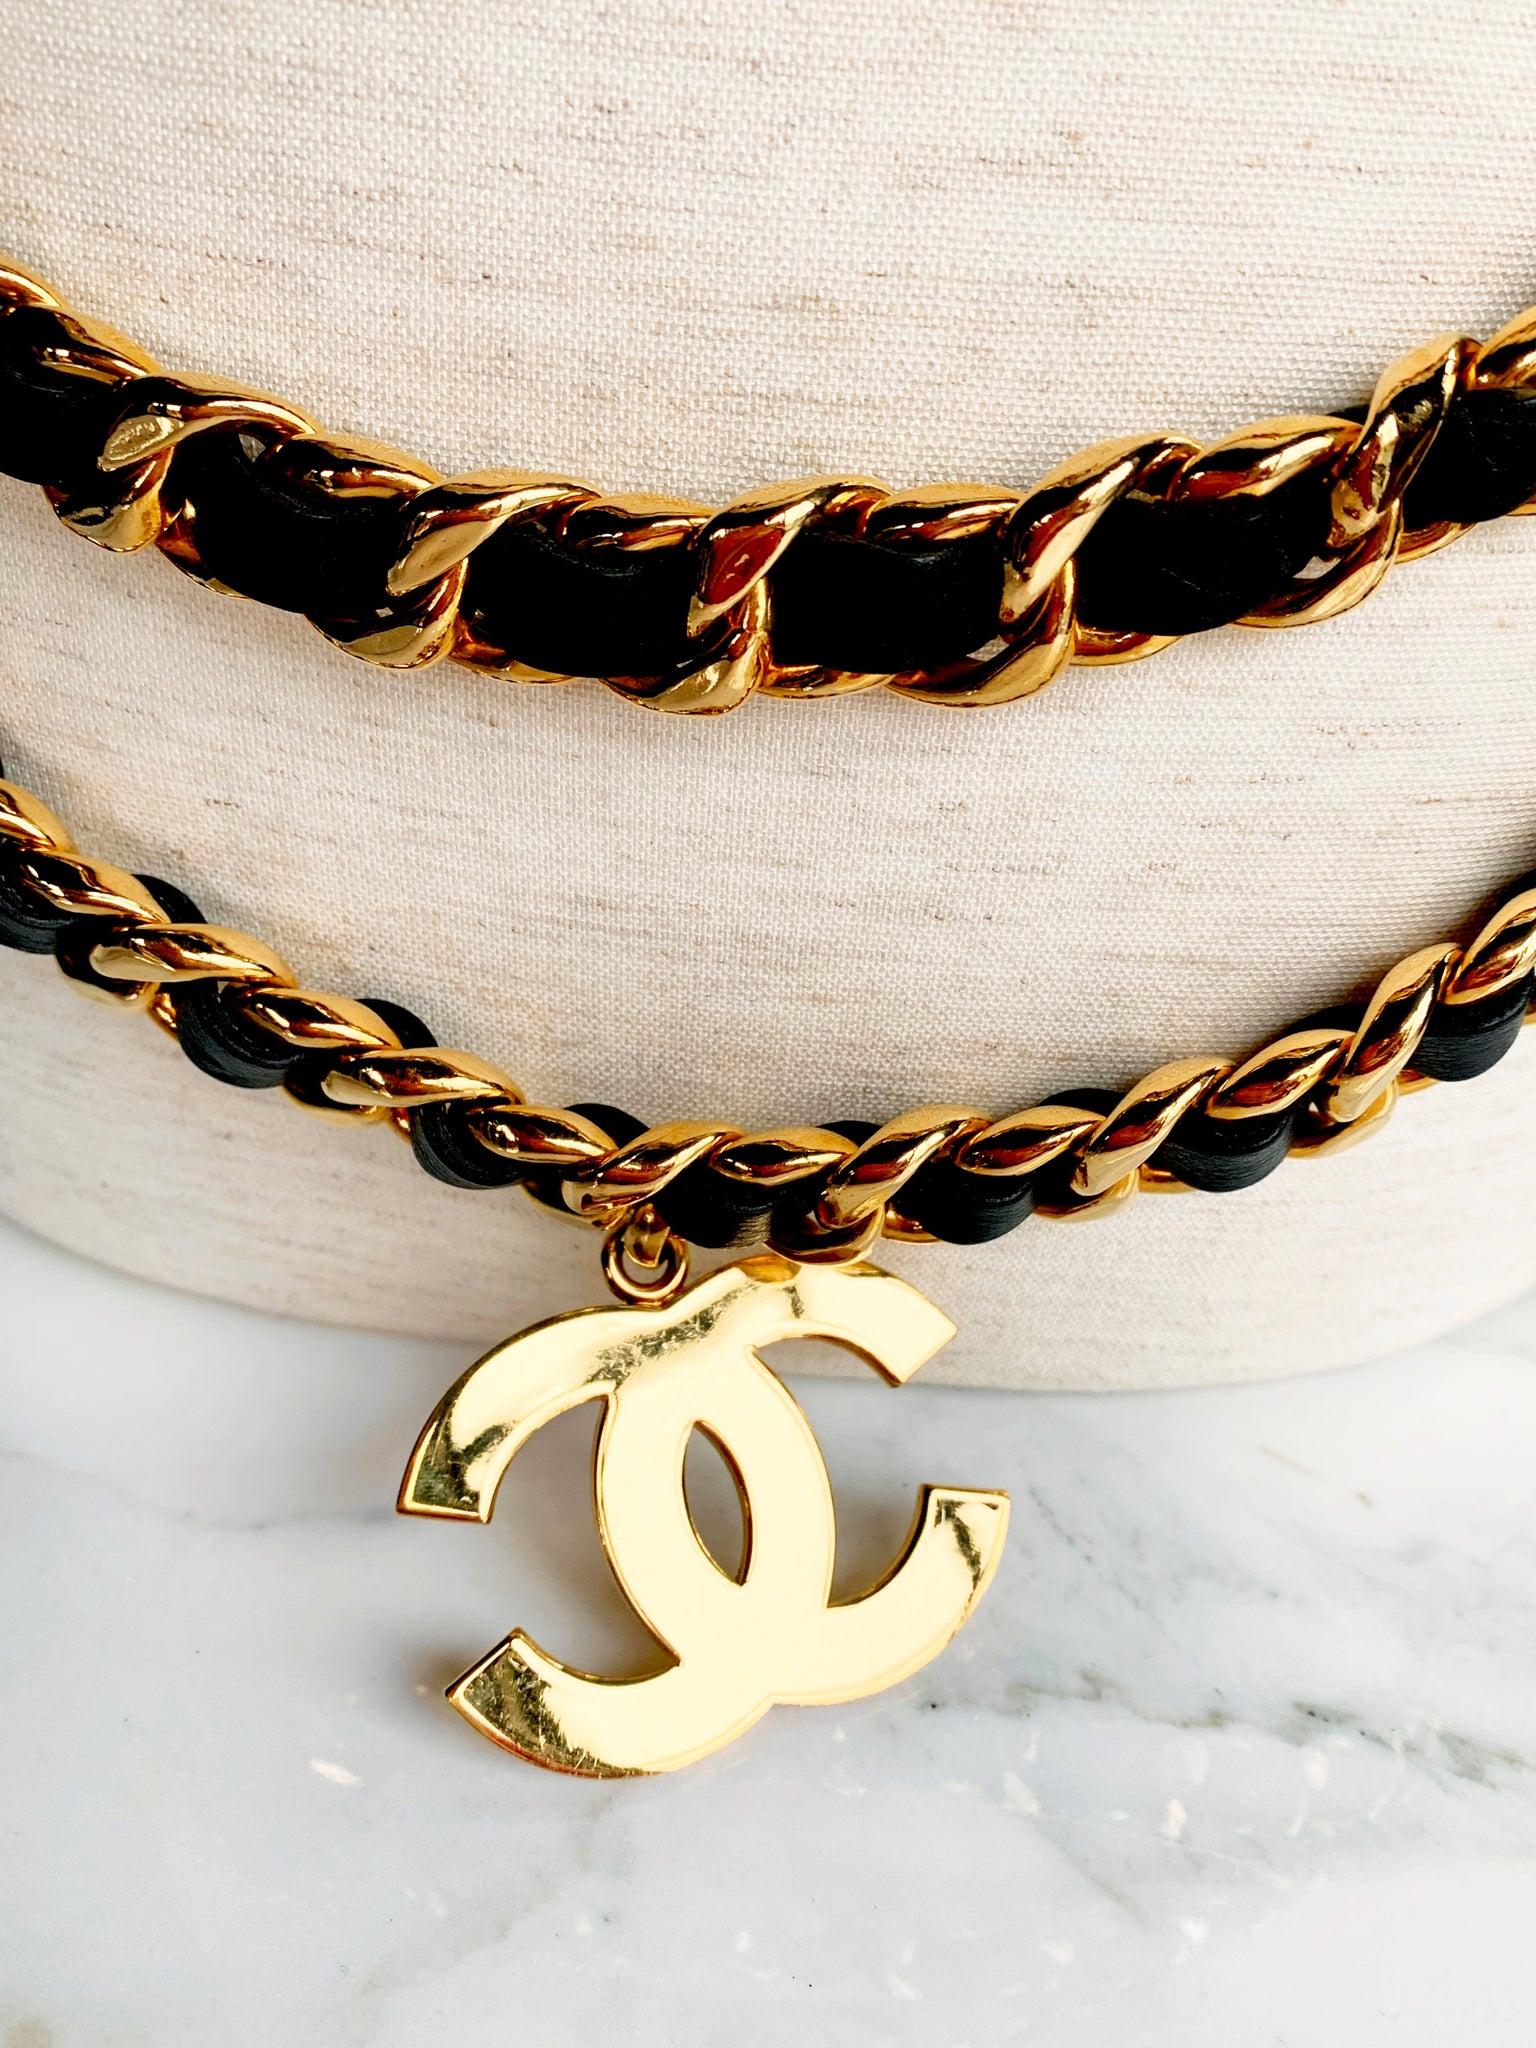 Vintage CHANEL gold chain belt with triple layer chains and two